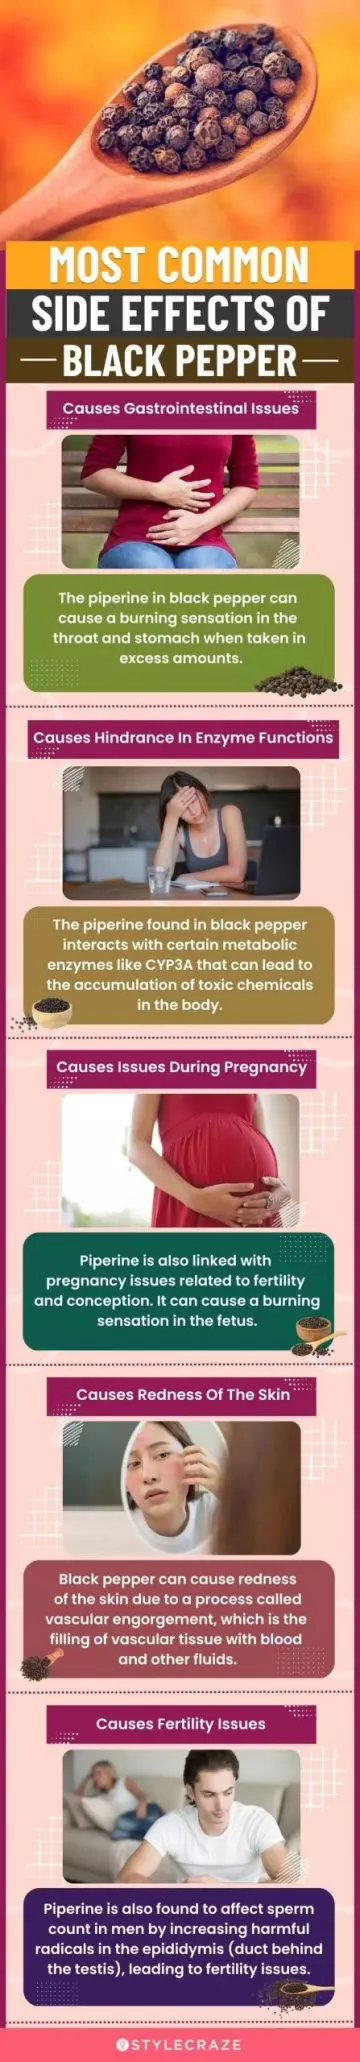 most common side effects of black pepper (infographic)